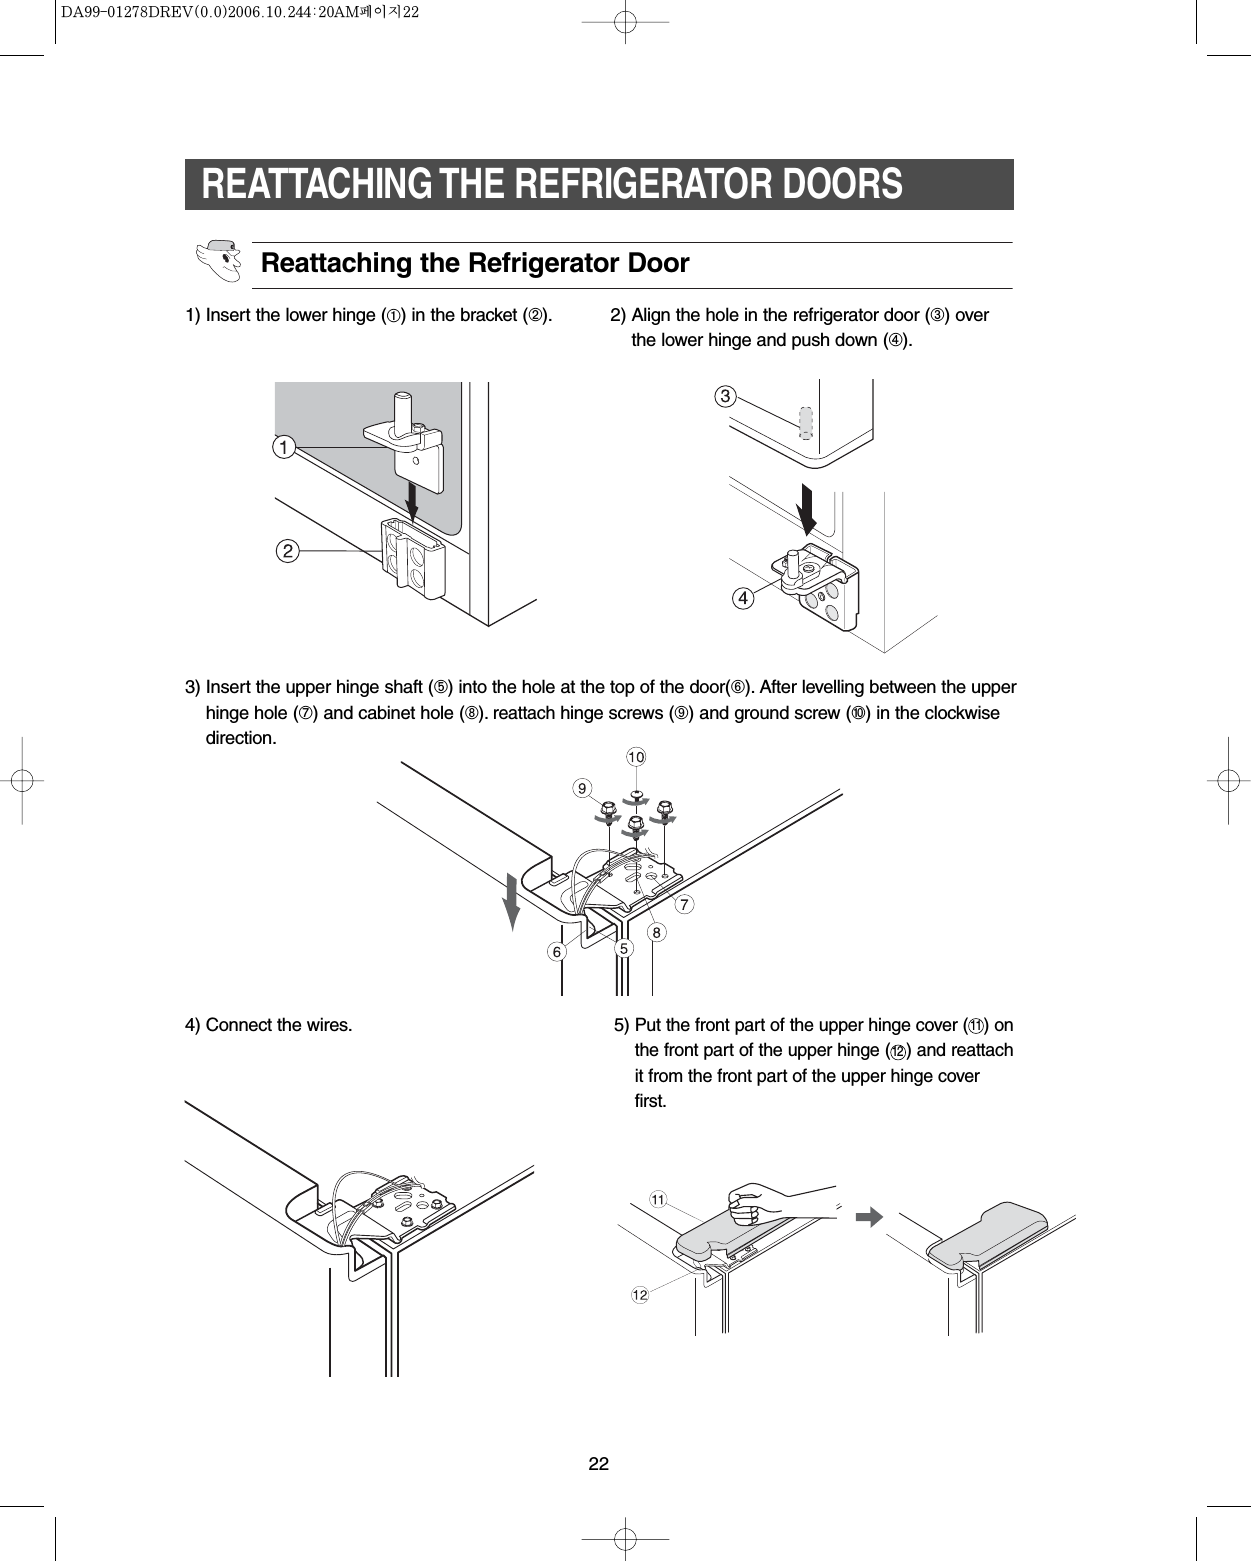 22REATTACHING THE REFRIGERATOR DOORSReattaching the Refrigerator Door1) Insert the lower hinge (➀) in the bracket (➁). 2) Align the hole in the refrigerator door (➂) overthe lower hinge and push down (➃).3) Insert the upper hinge shaft (➄) into the hole at the top of the door(➅). After levelling between the upperhinge hole (➆) and cabinet hole (➇). reattach hinge screws (➈) and ground screw (➉) in the clockwisedirection.4) Connect the wires. 5) Put the front part of the upper hinge cover ( ) onthe front part of the upper hinge (   ) and reattachit from the front part of the upper hinge coverfirst.1112